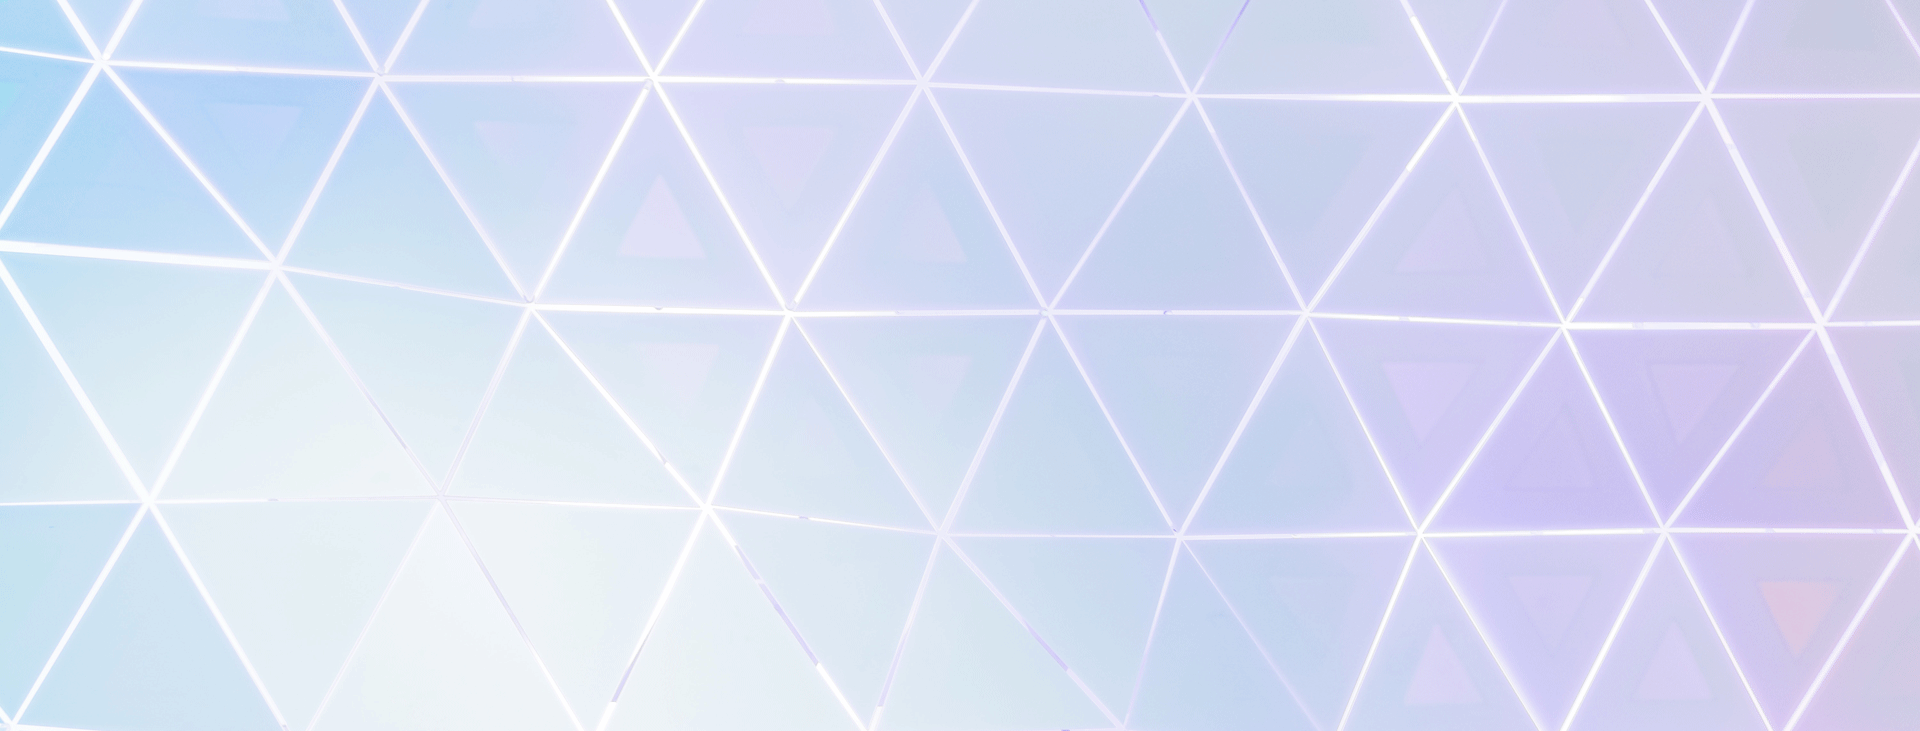 Blurred triangle pattern in white, purple and blue